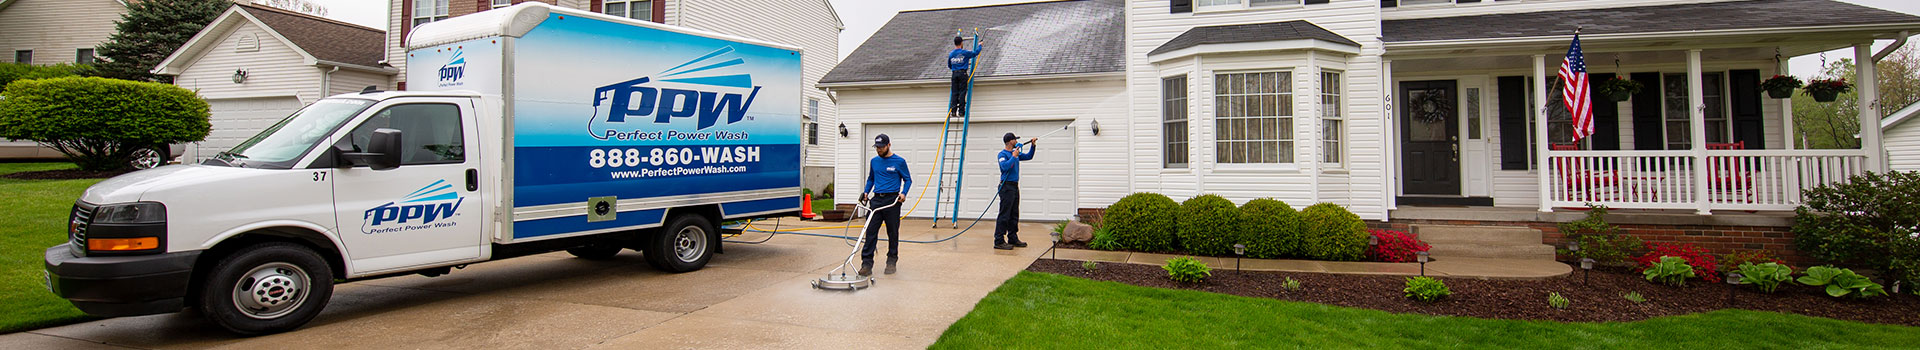 Power Washing Services Being Performed on a House